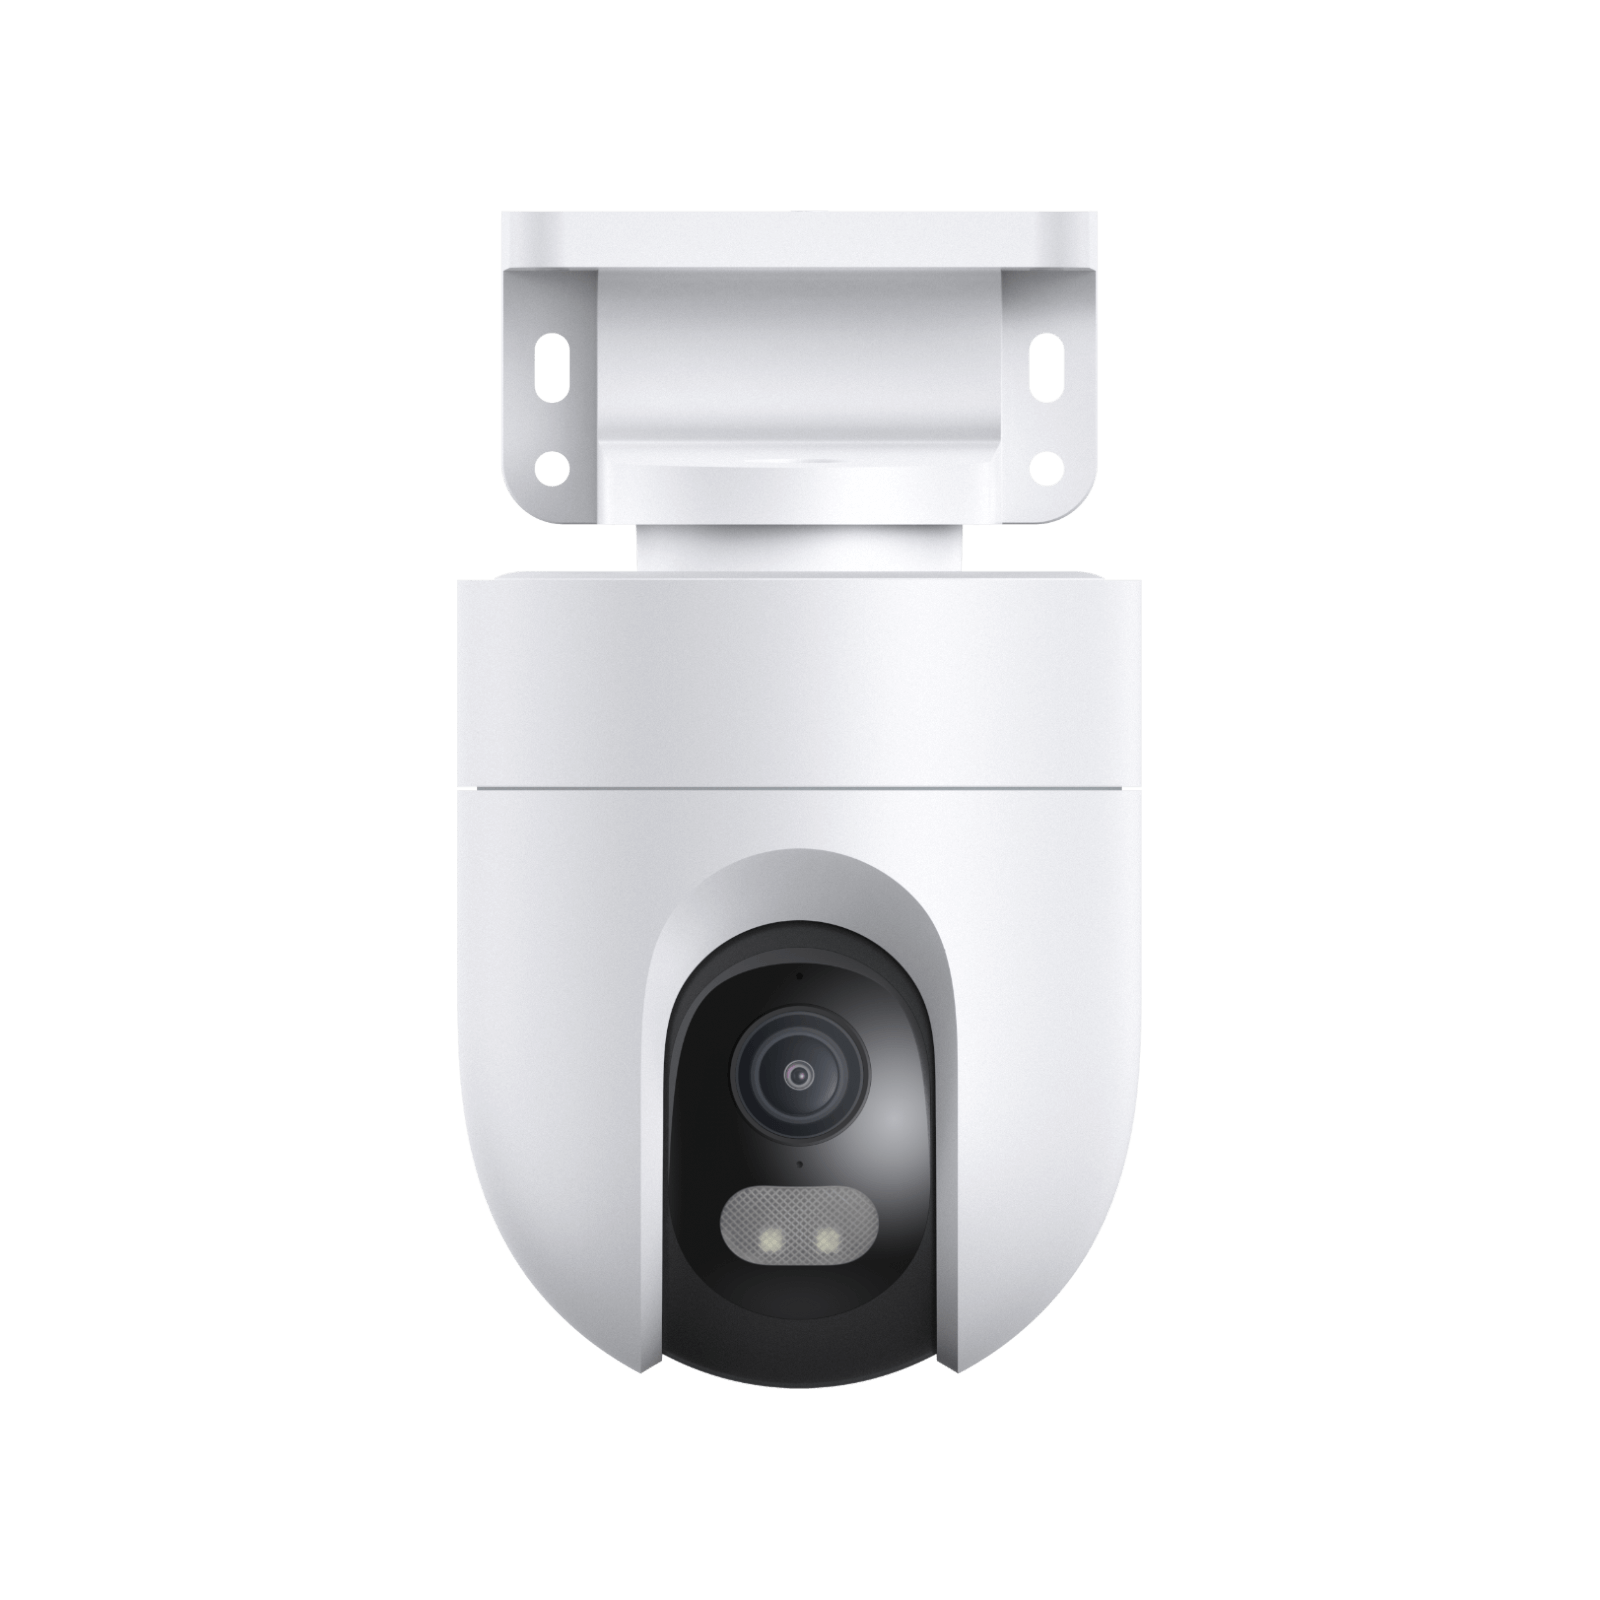 Xiaomi C400 360 Degree Smart Home Security Camera (Gloval Version) Price  5,690 Taka Only 👉Visit website for price with details & place…